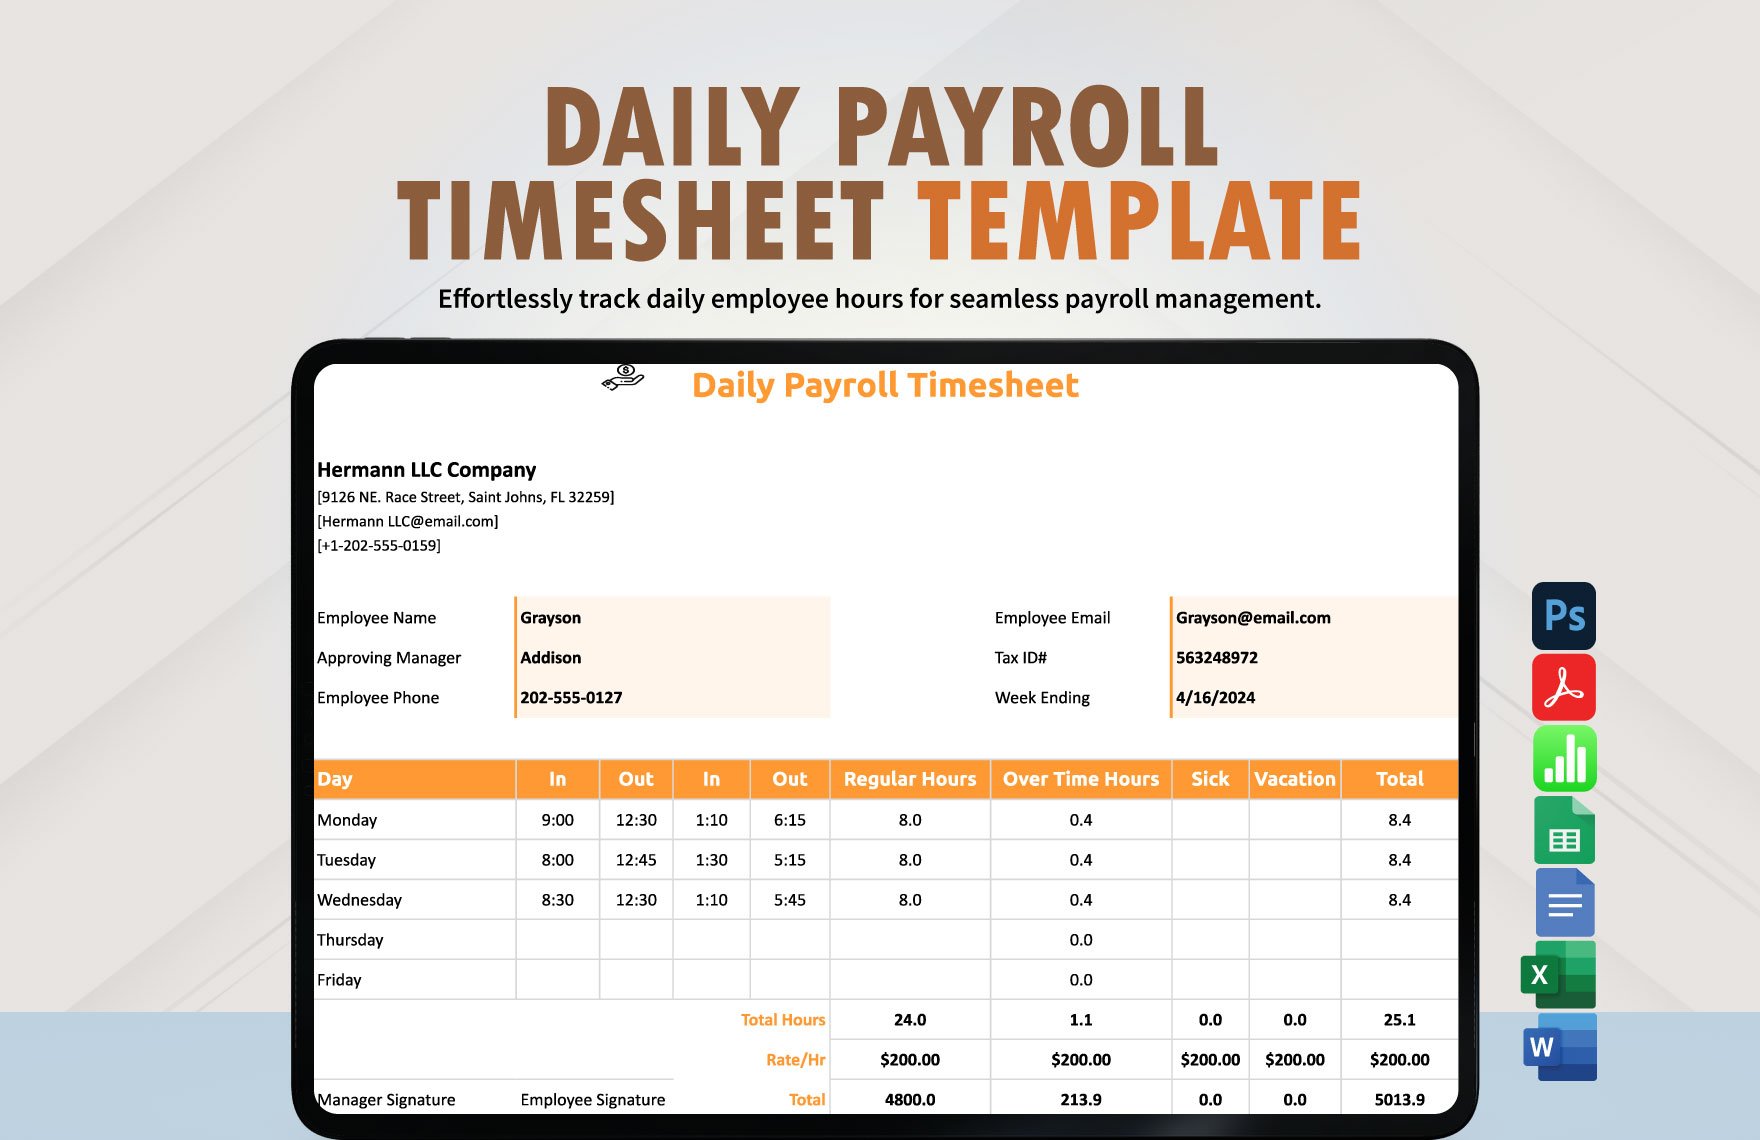 Daily Payroll Timesheet Template in Word, Google Docs, Excel, PDF, Google Sheets, PSD, Apple Numbers